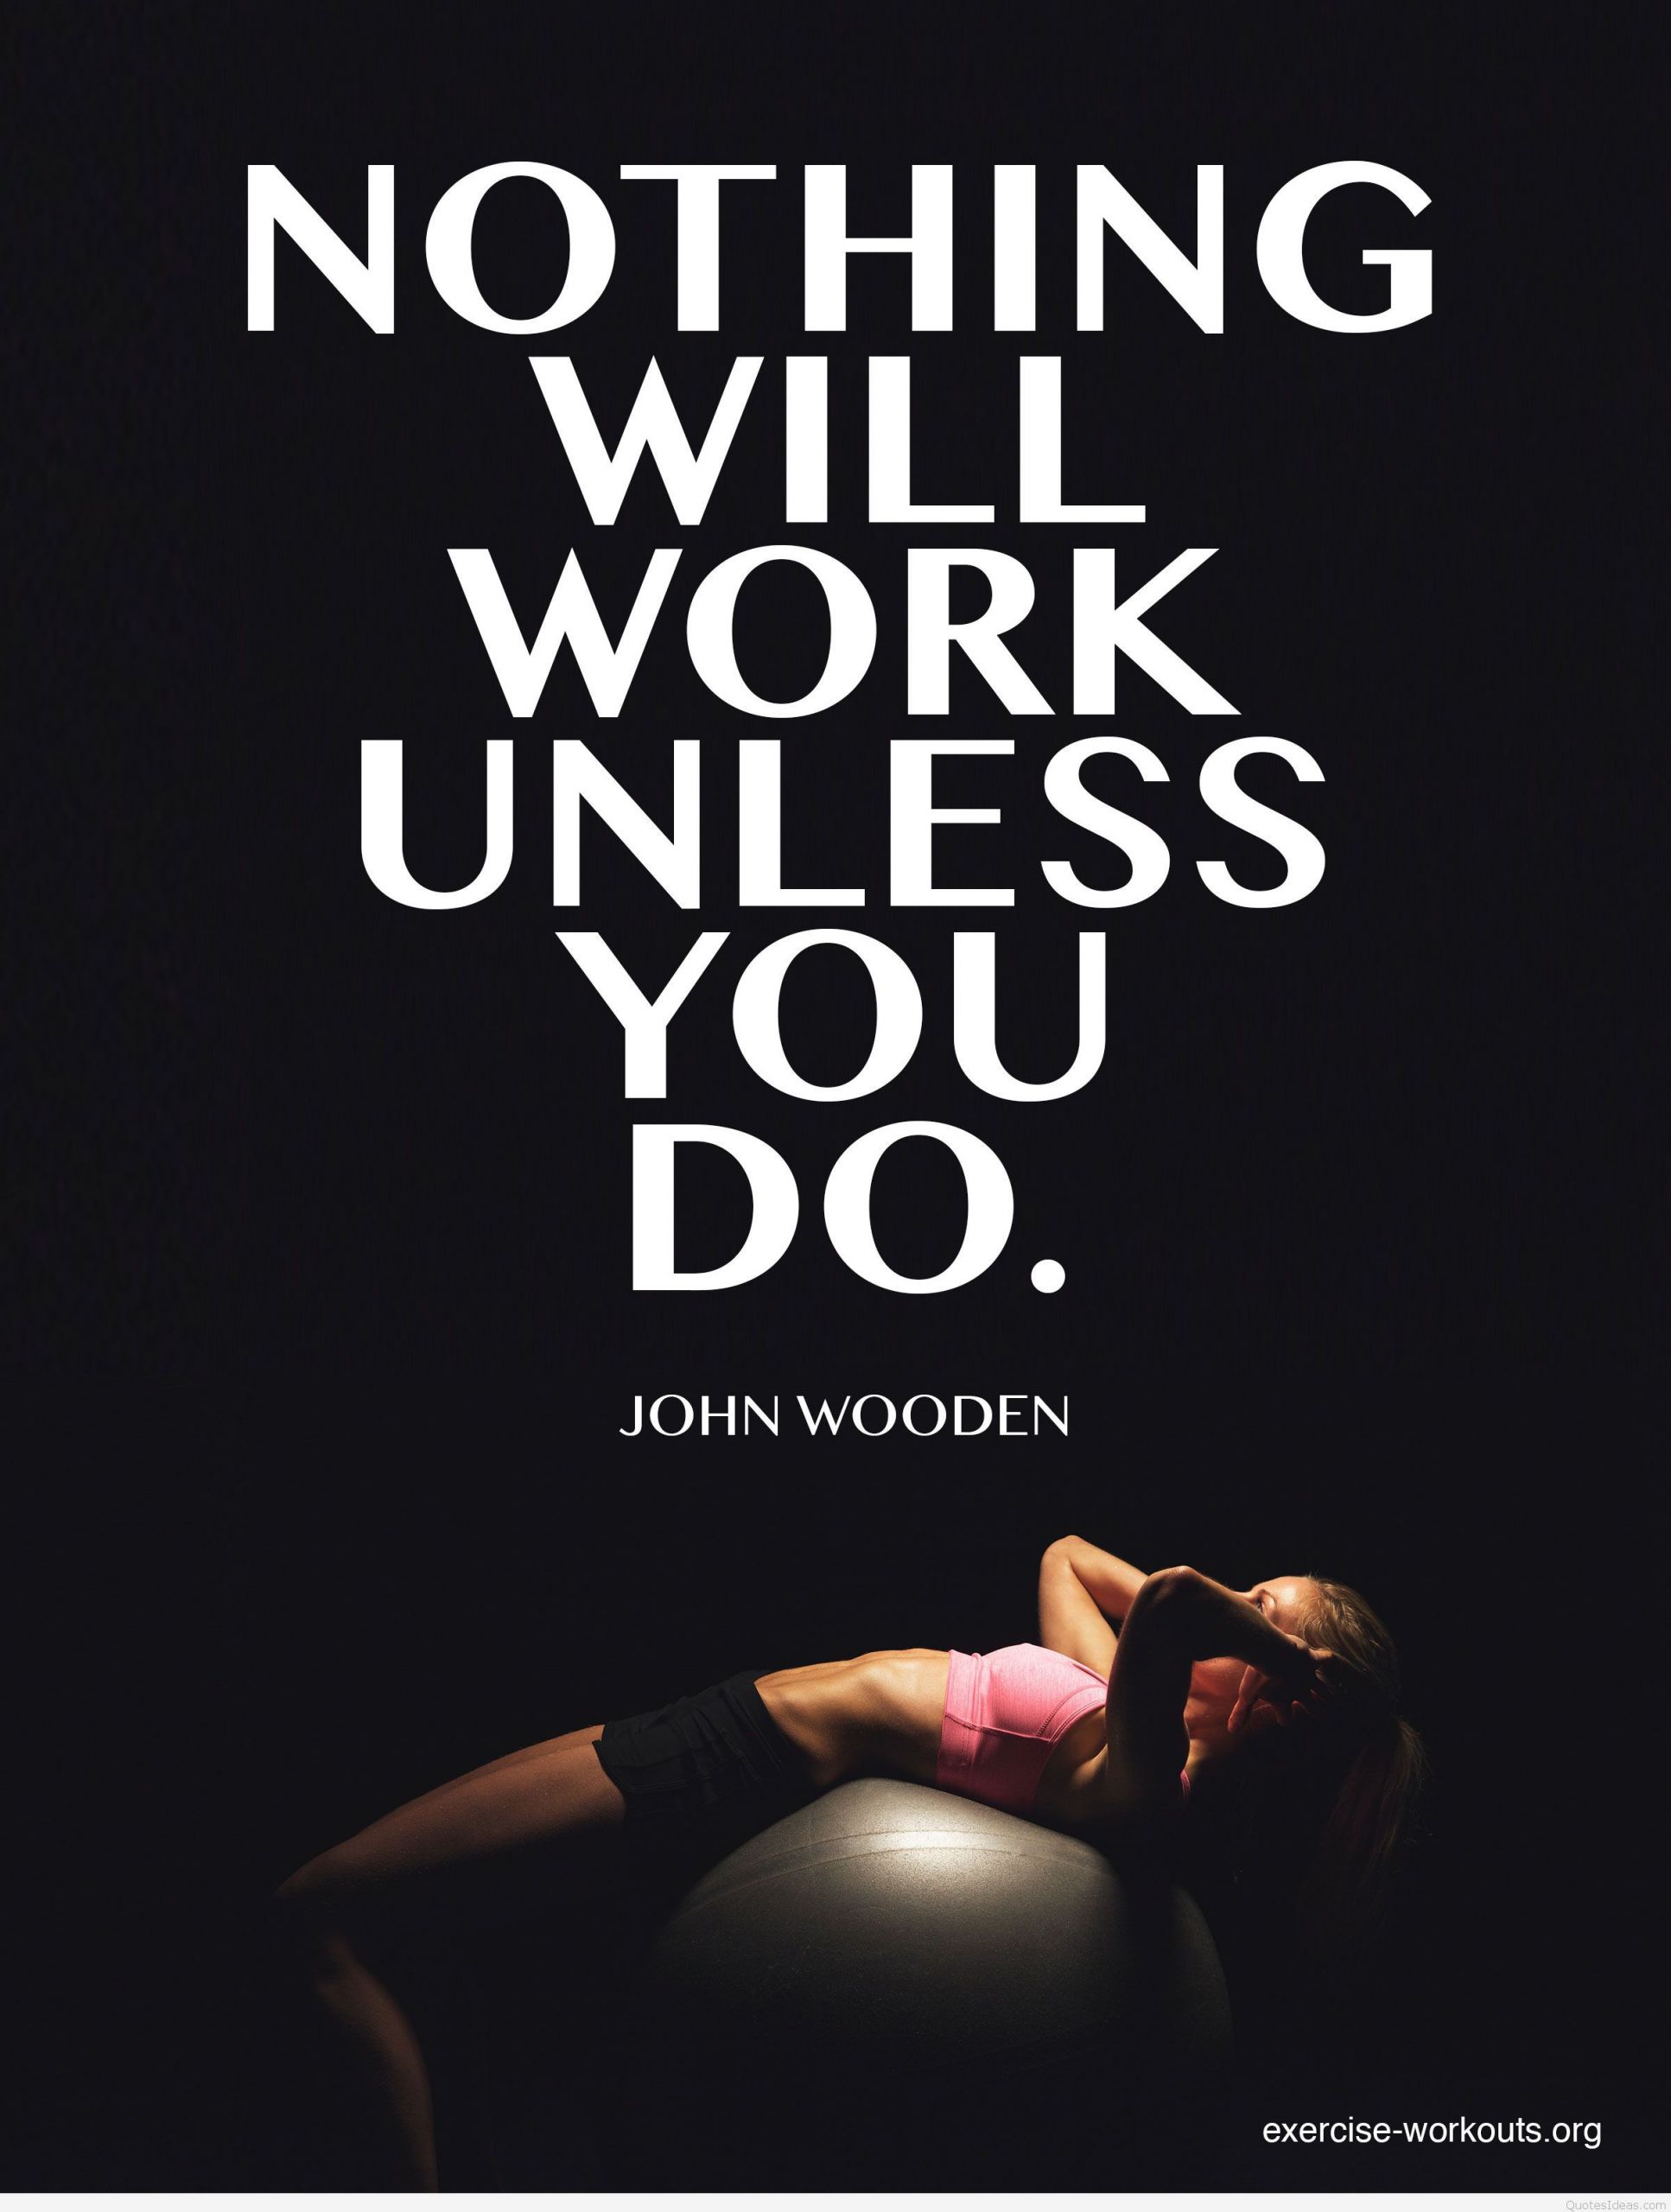 Fitness Motivational Quotes
 Motivational fitness quotes pictures and sayings